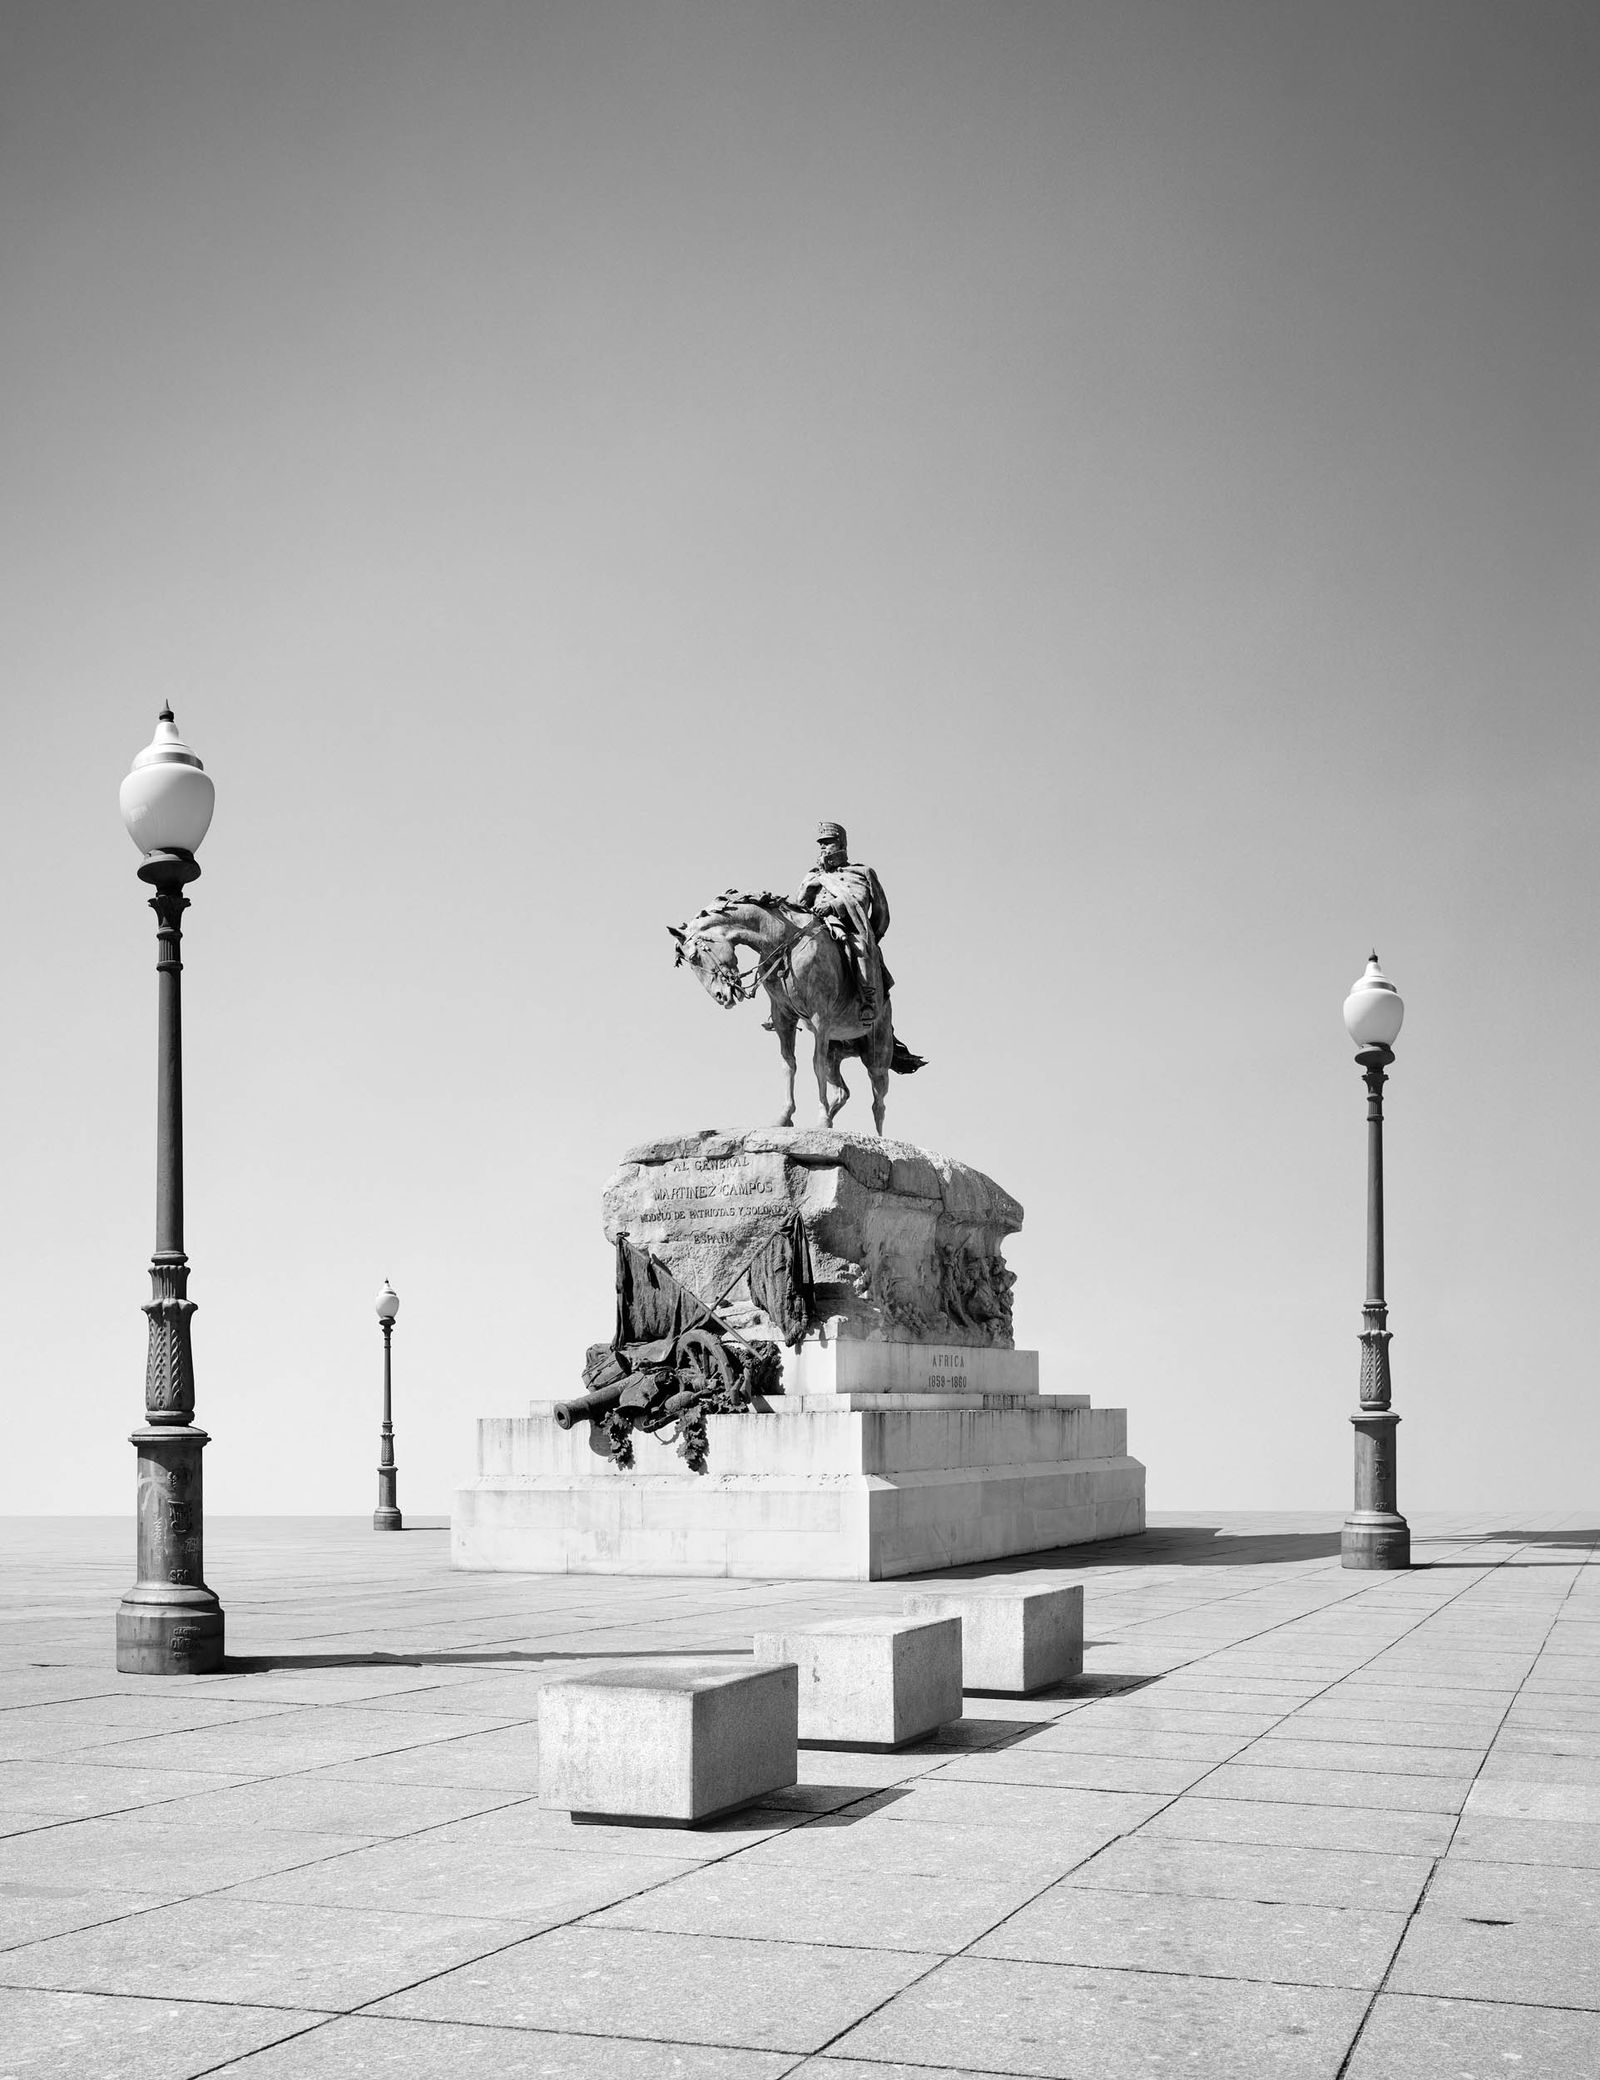 © Fernando Maselli - Image from the Monuments photography project